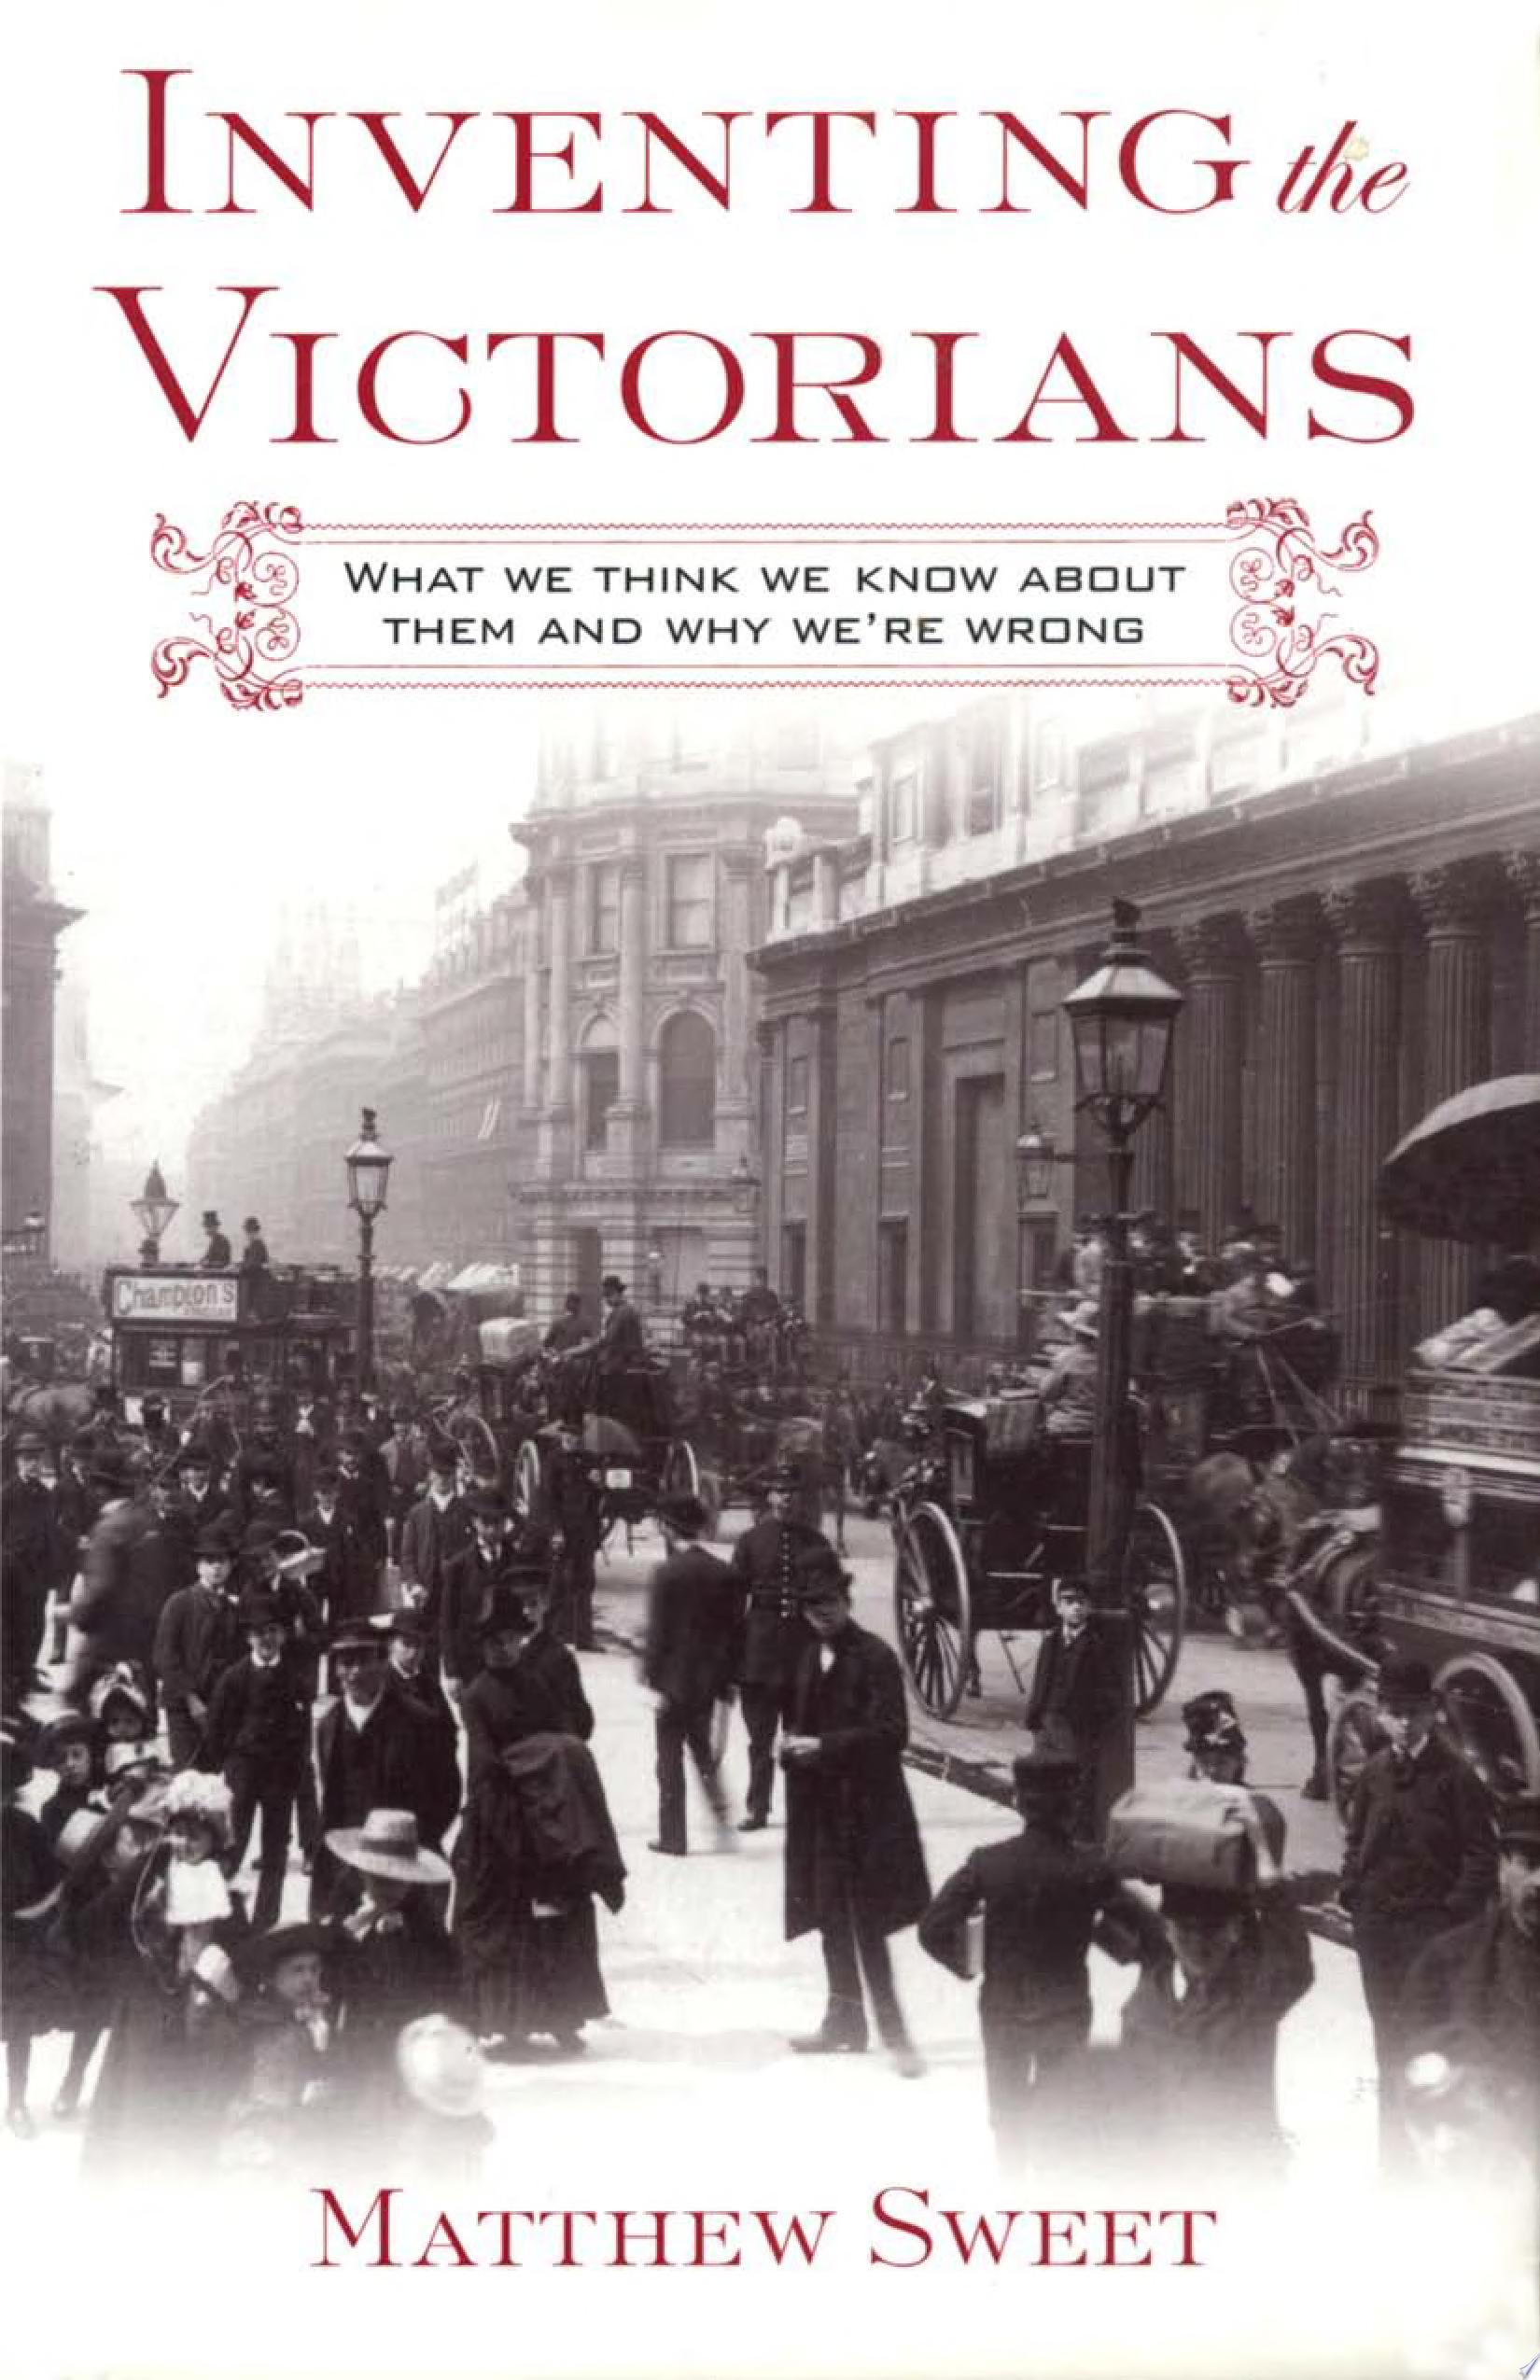 Image for "Inventing the Victorians"